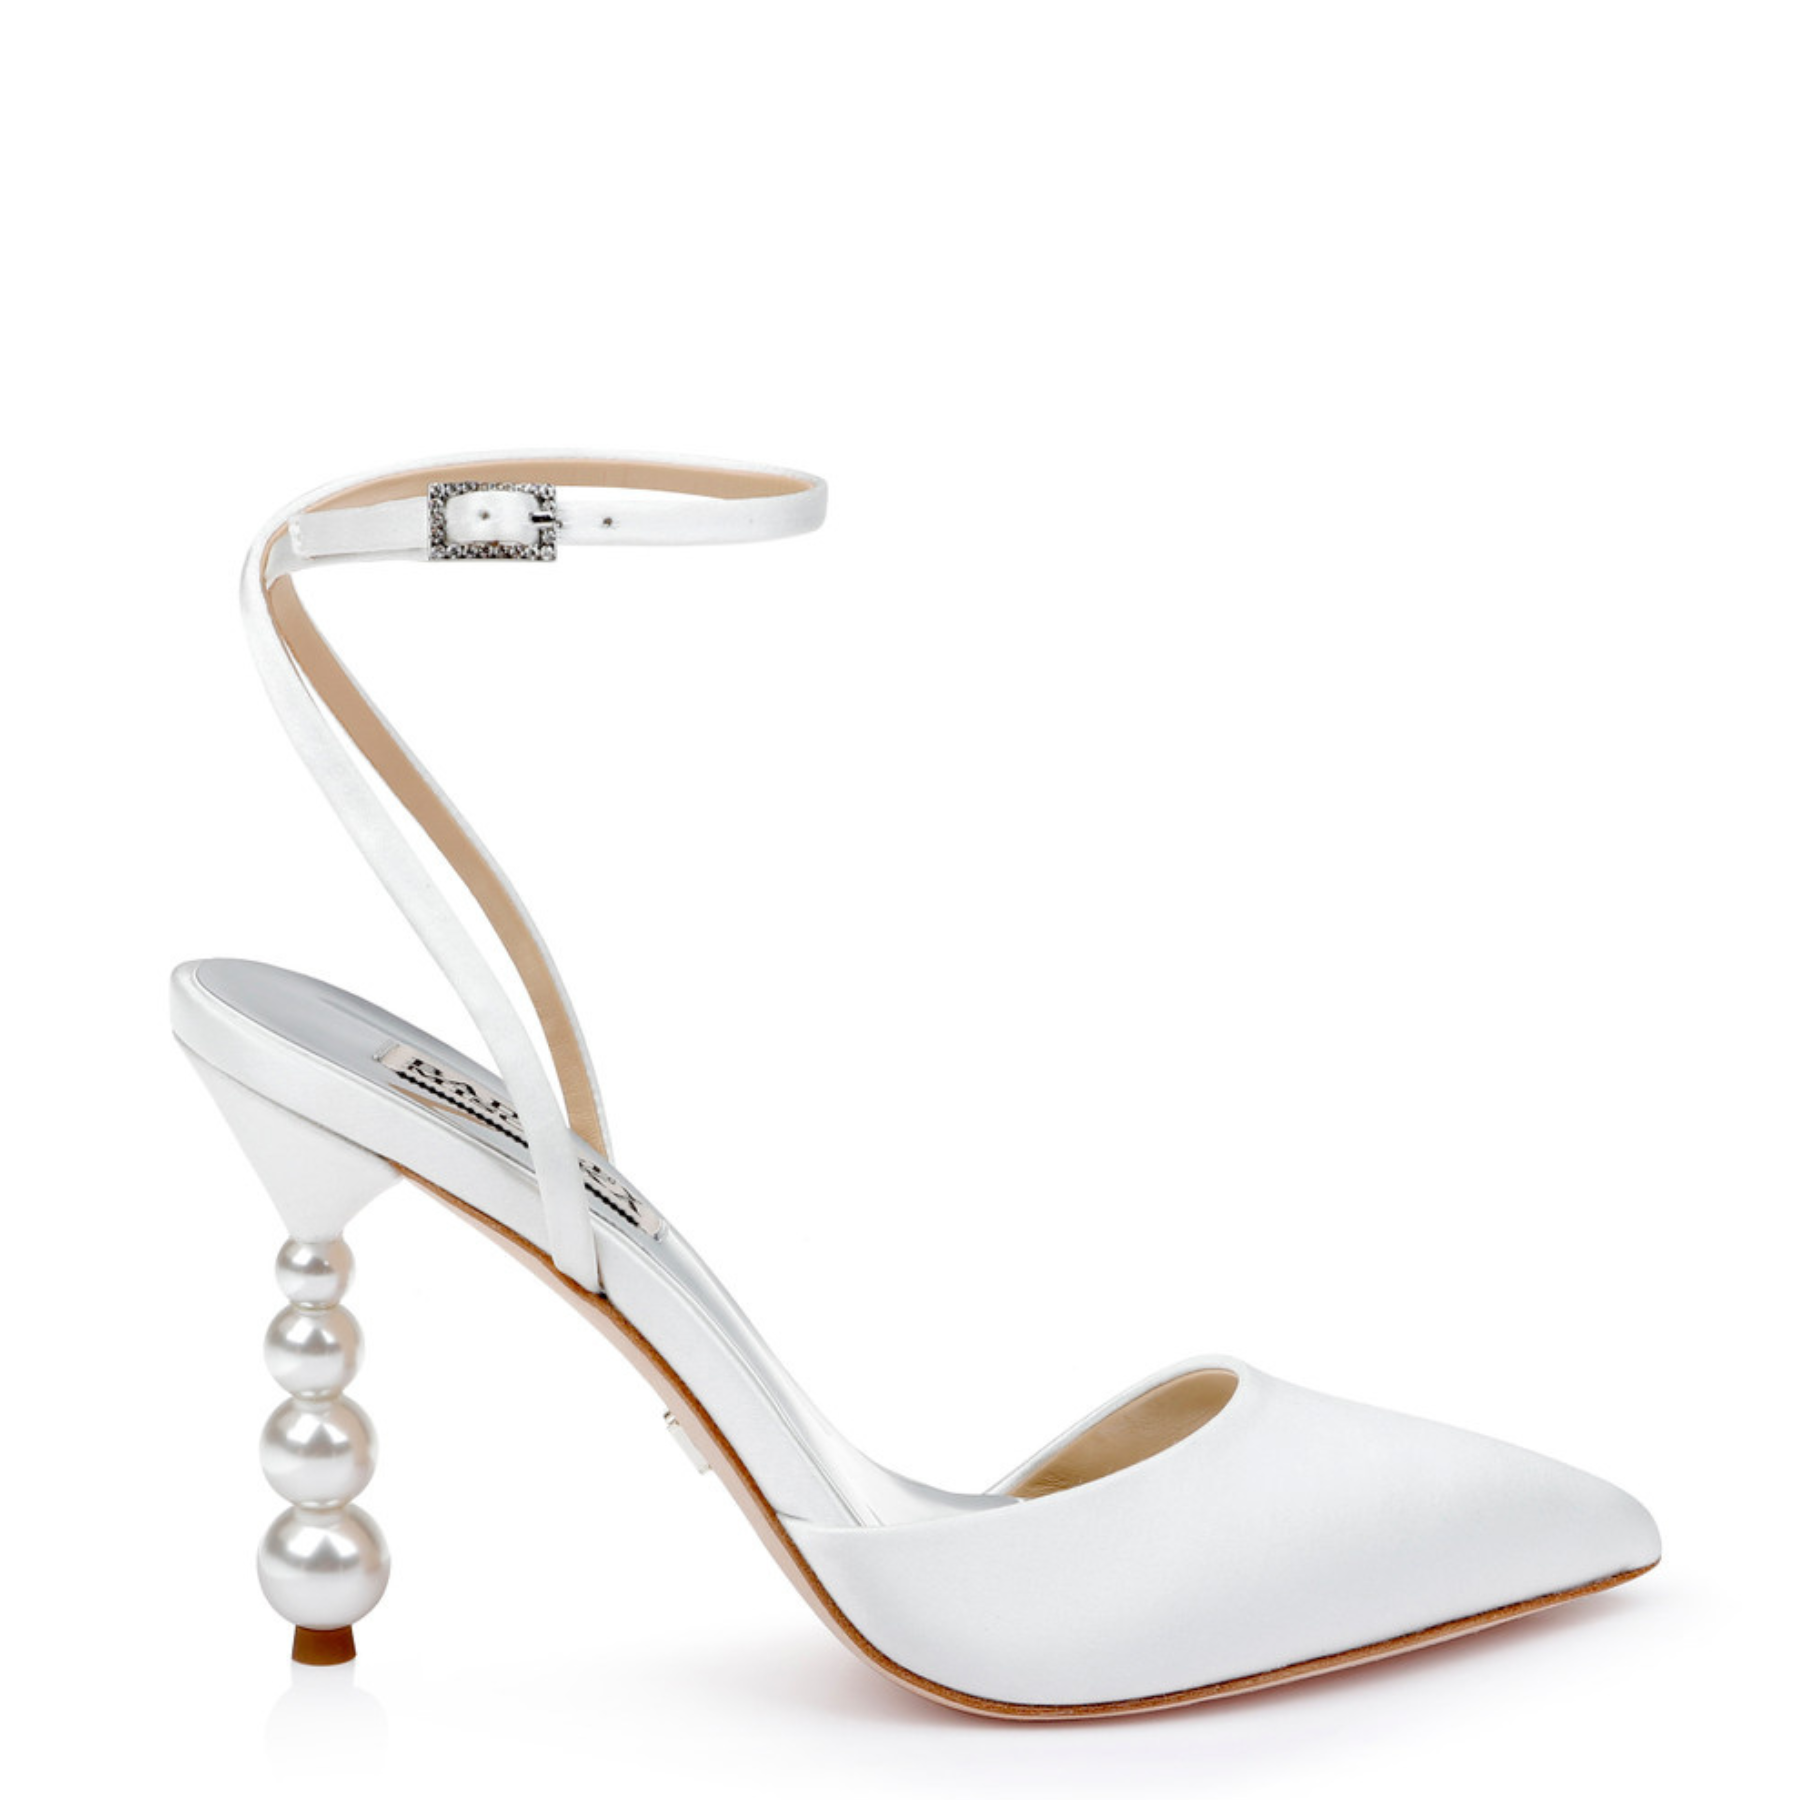 Chic White Stiletto Heels - Ankle Strap Heels - Pointed-Toe Pumps - Lulus